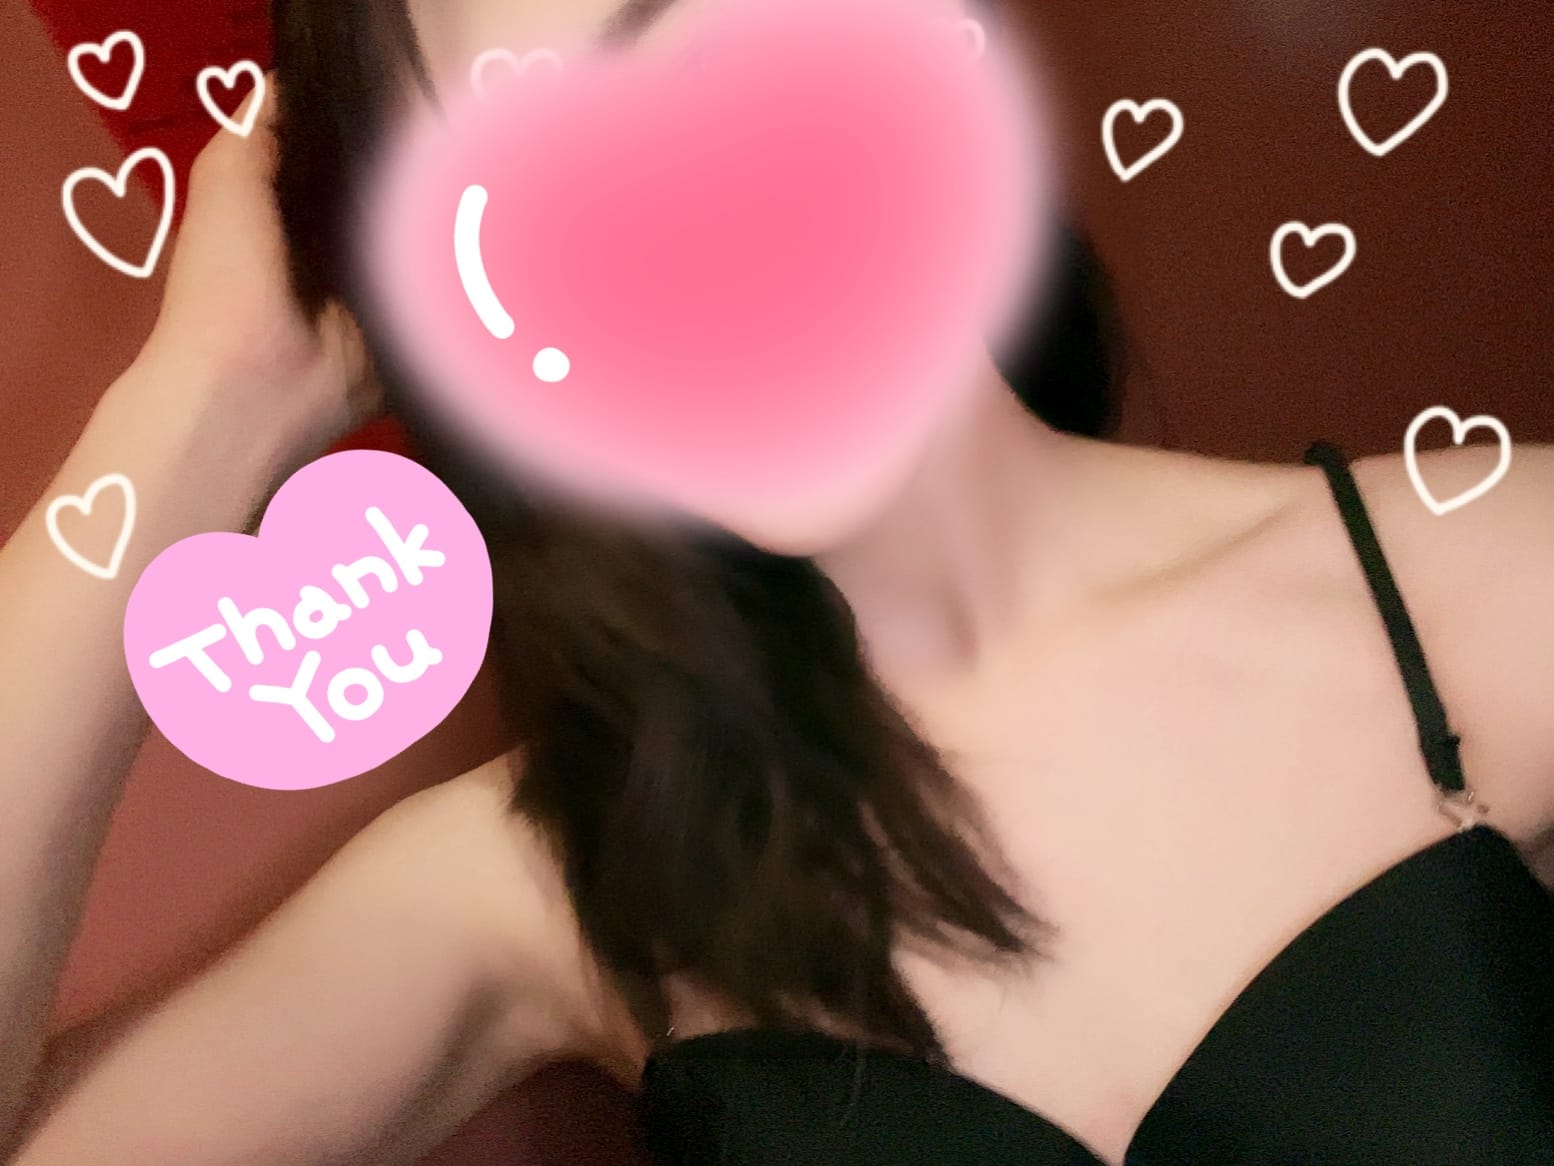 「Thanks for you♡♡♡」02/11(日) 12:28 | つばさの写メ日記